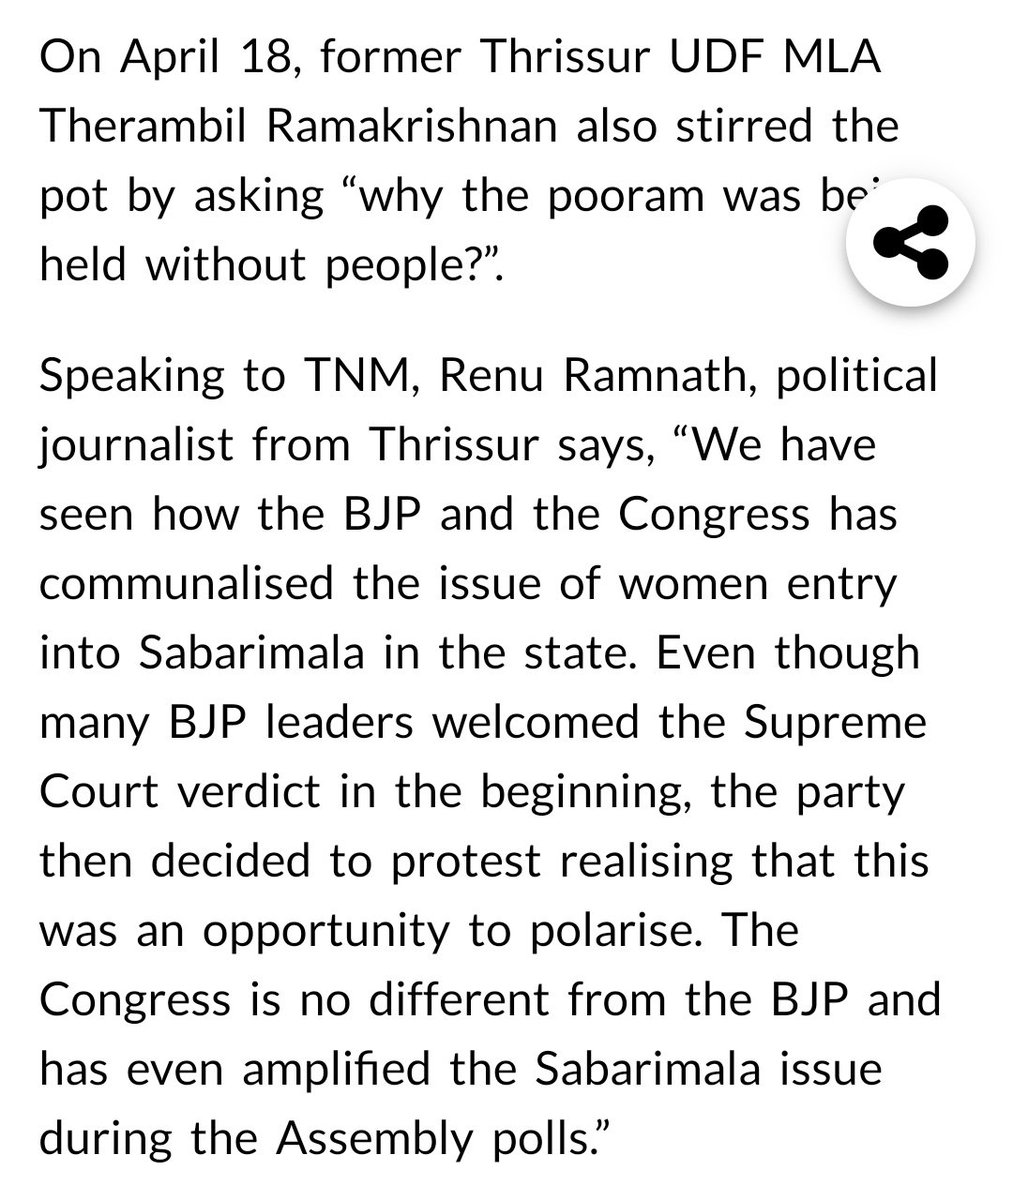 As if this apology of an article from  @thenewsminute wasn't bad enough. Therambil Ramakrishnan misquoted too, according to my former Trissur reporter.